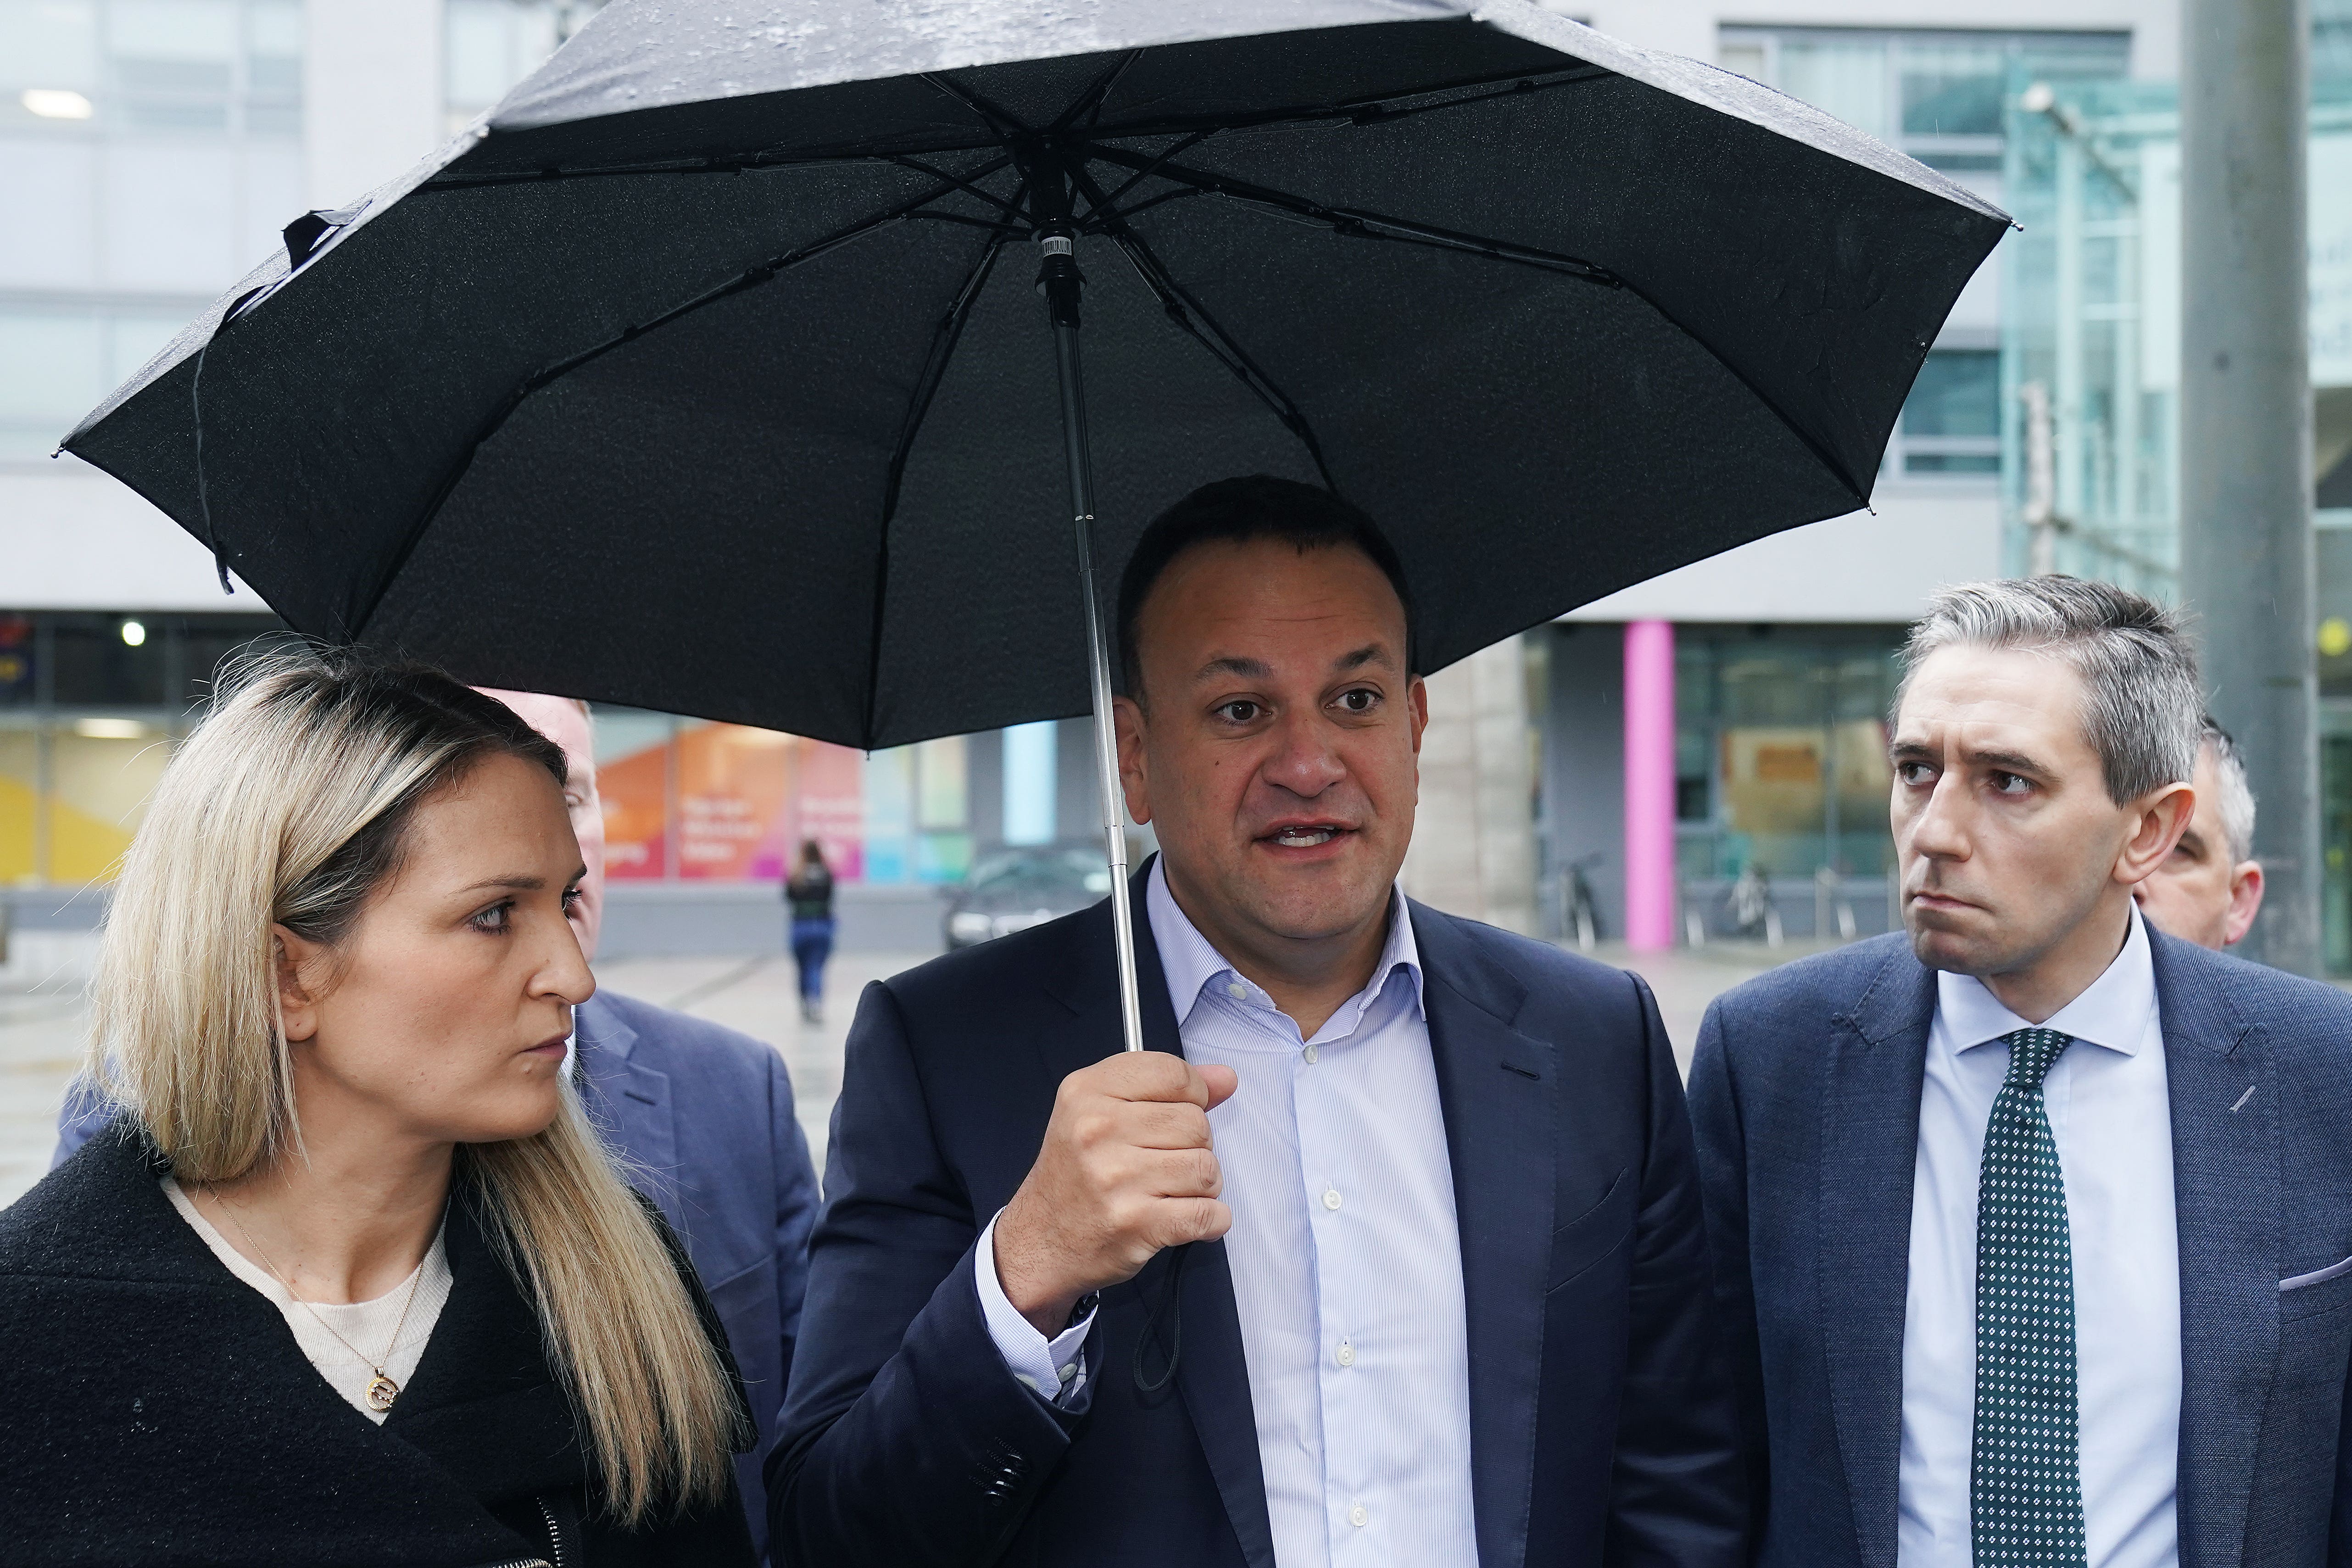 Taoiseach Leo Varadkar (centre) with Minister for Justice Helen McEntee (left) and Minister for Further and Higher Education Simon Harris (Brian Lawless/PA)